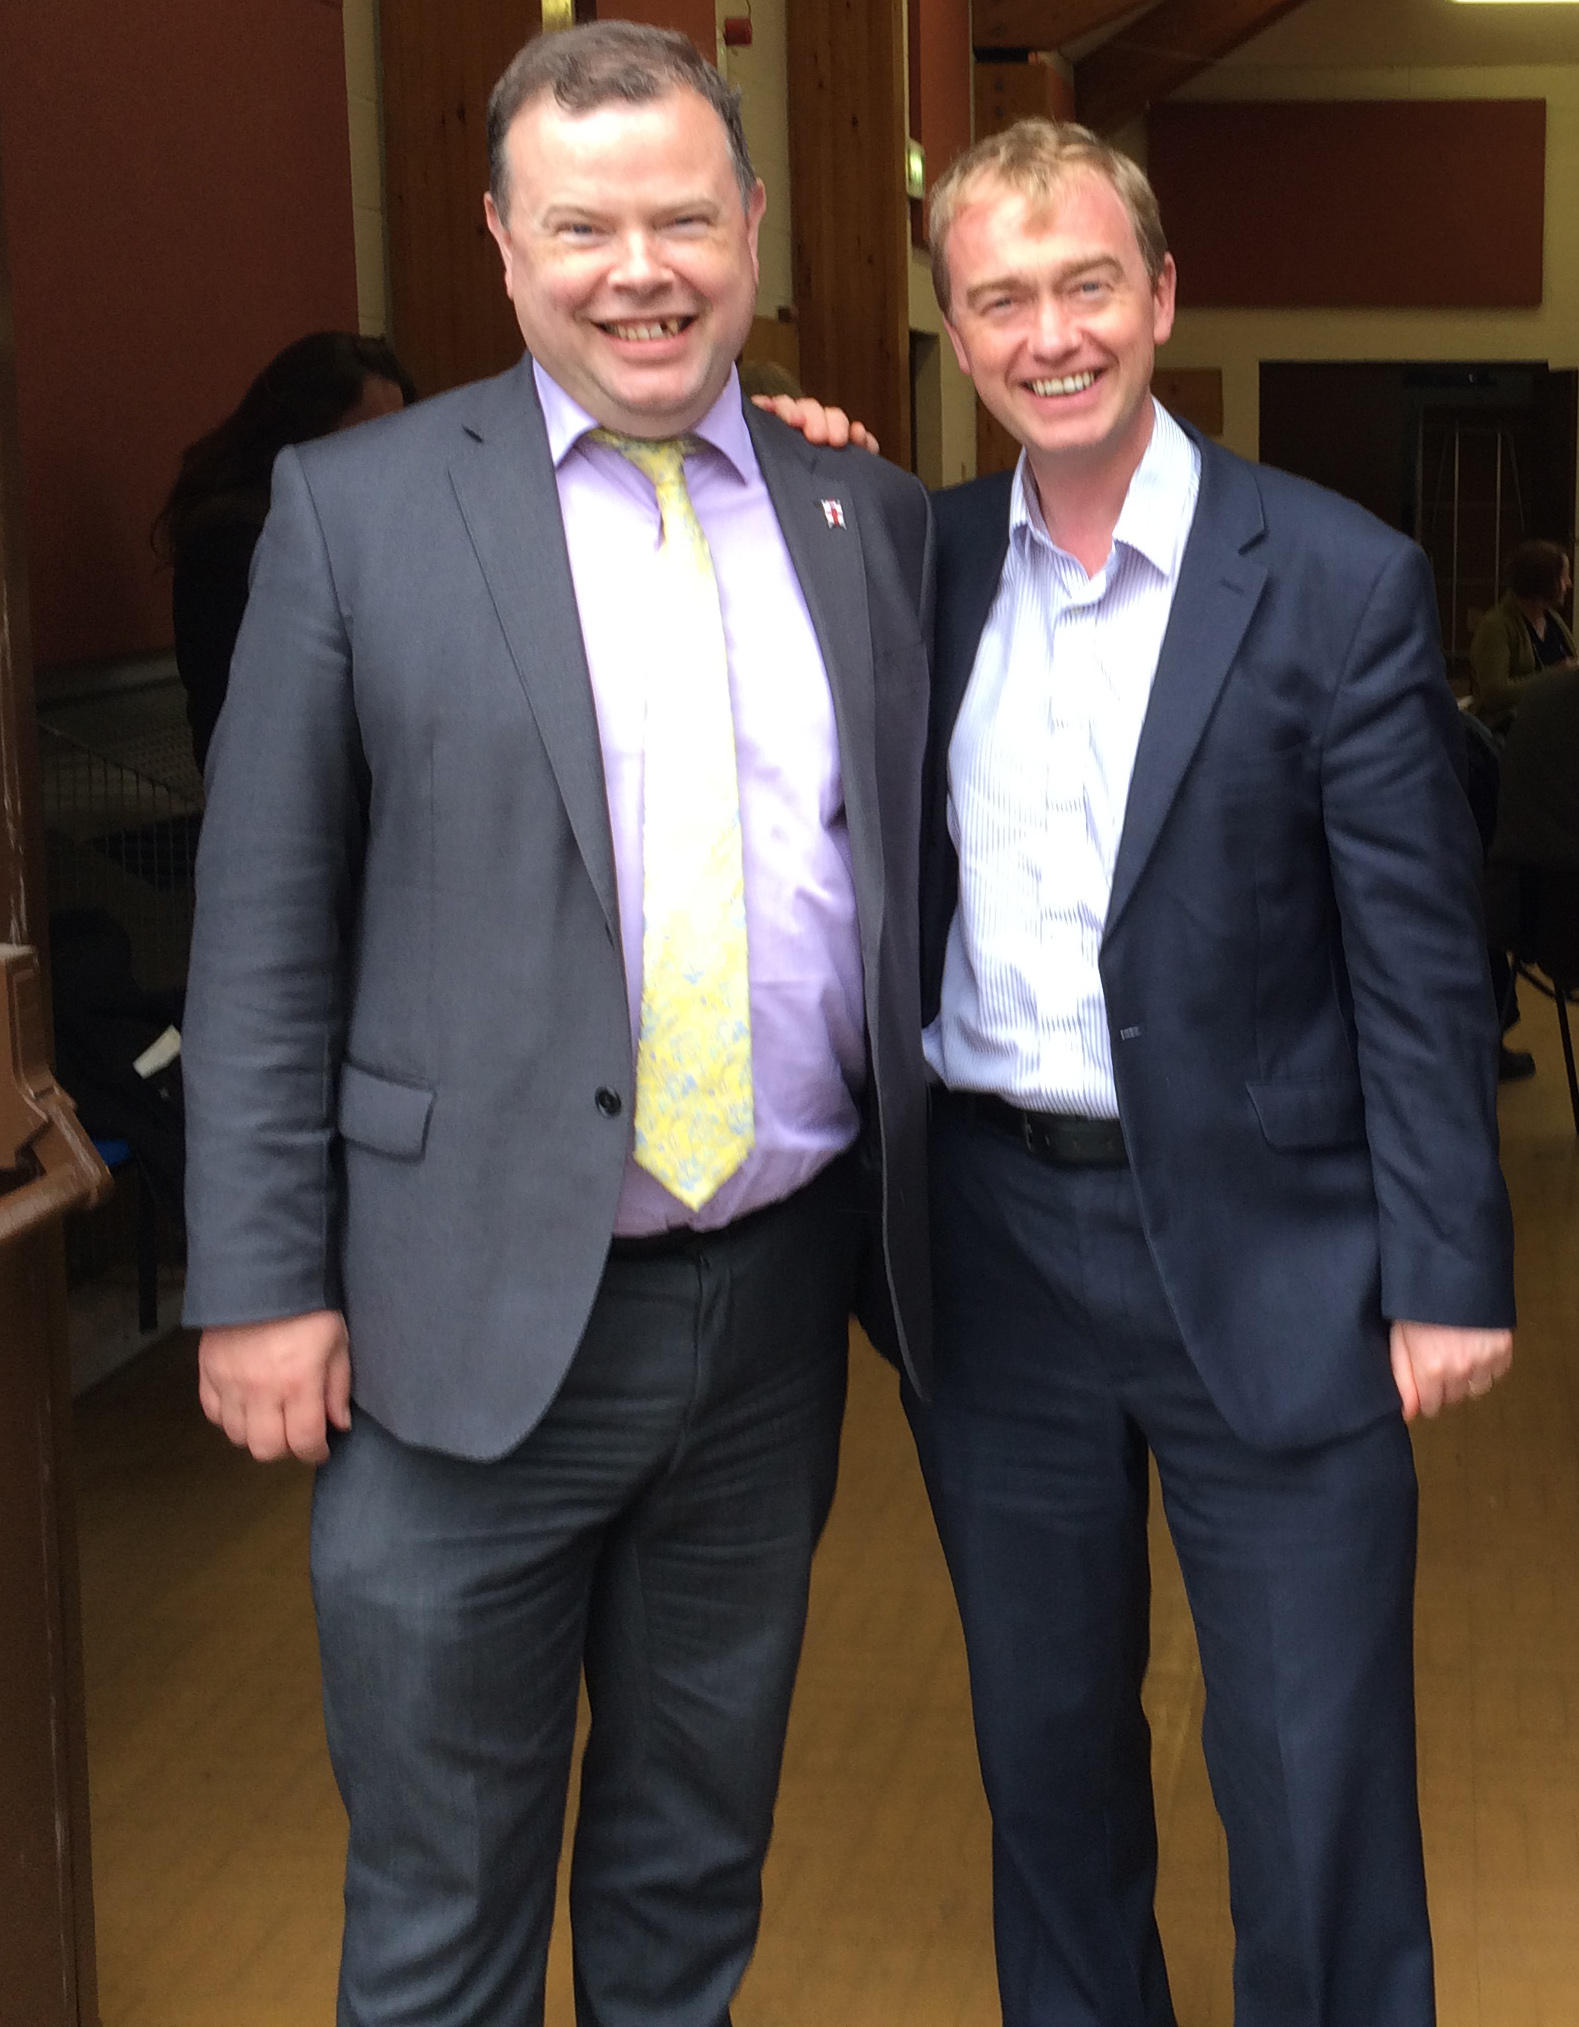 Andrew Waller welcomes Tim Farron to the Foxwood Community Centre